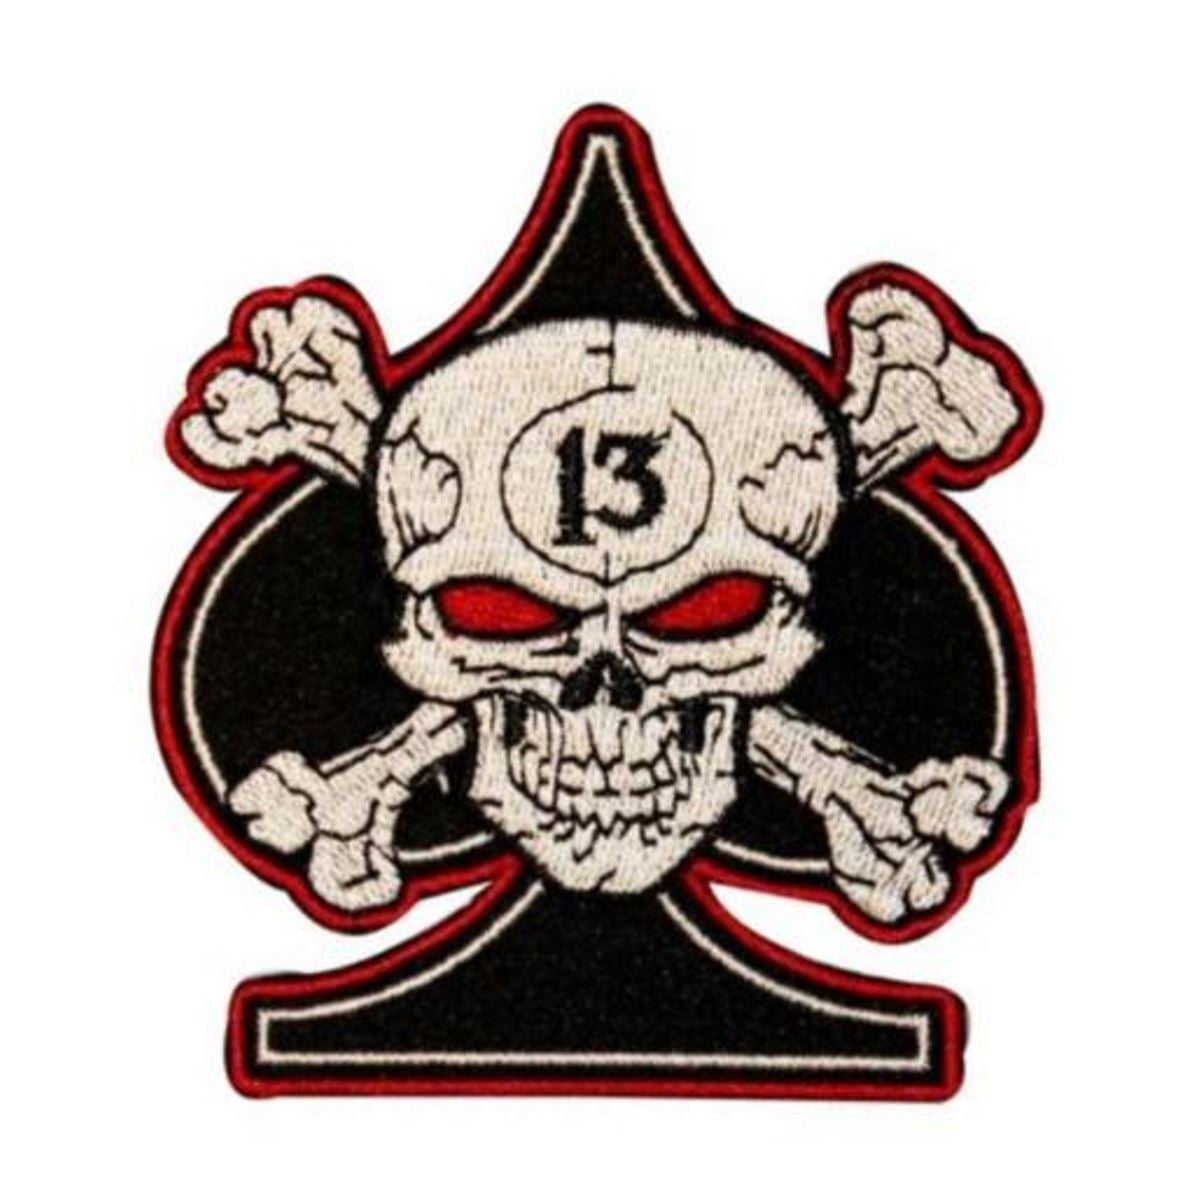 XL SKULL & CROSSBONES Large Embroidered PATCH Iron On Motorcycle 10.5" 